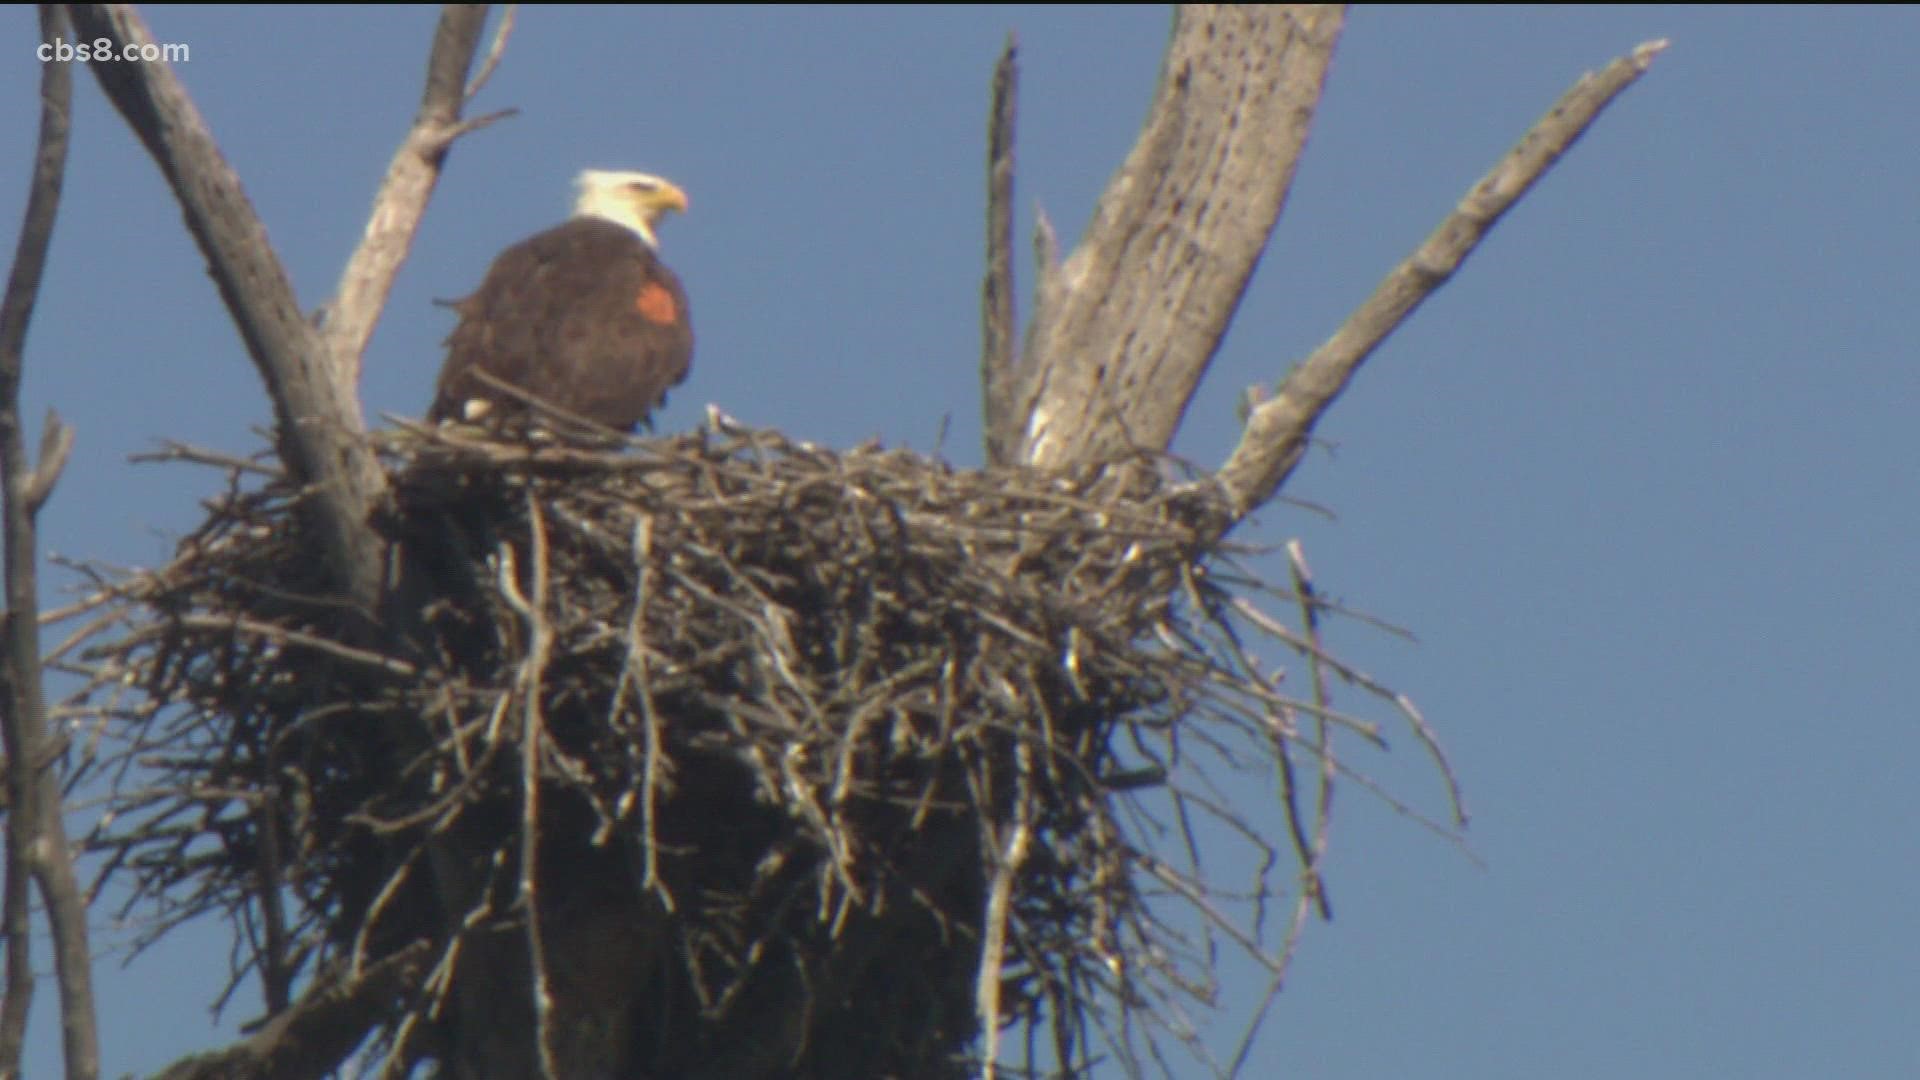 In the mid 70's there were only 30 nesting pairs of Bald Eagles because of DDT.